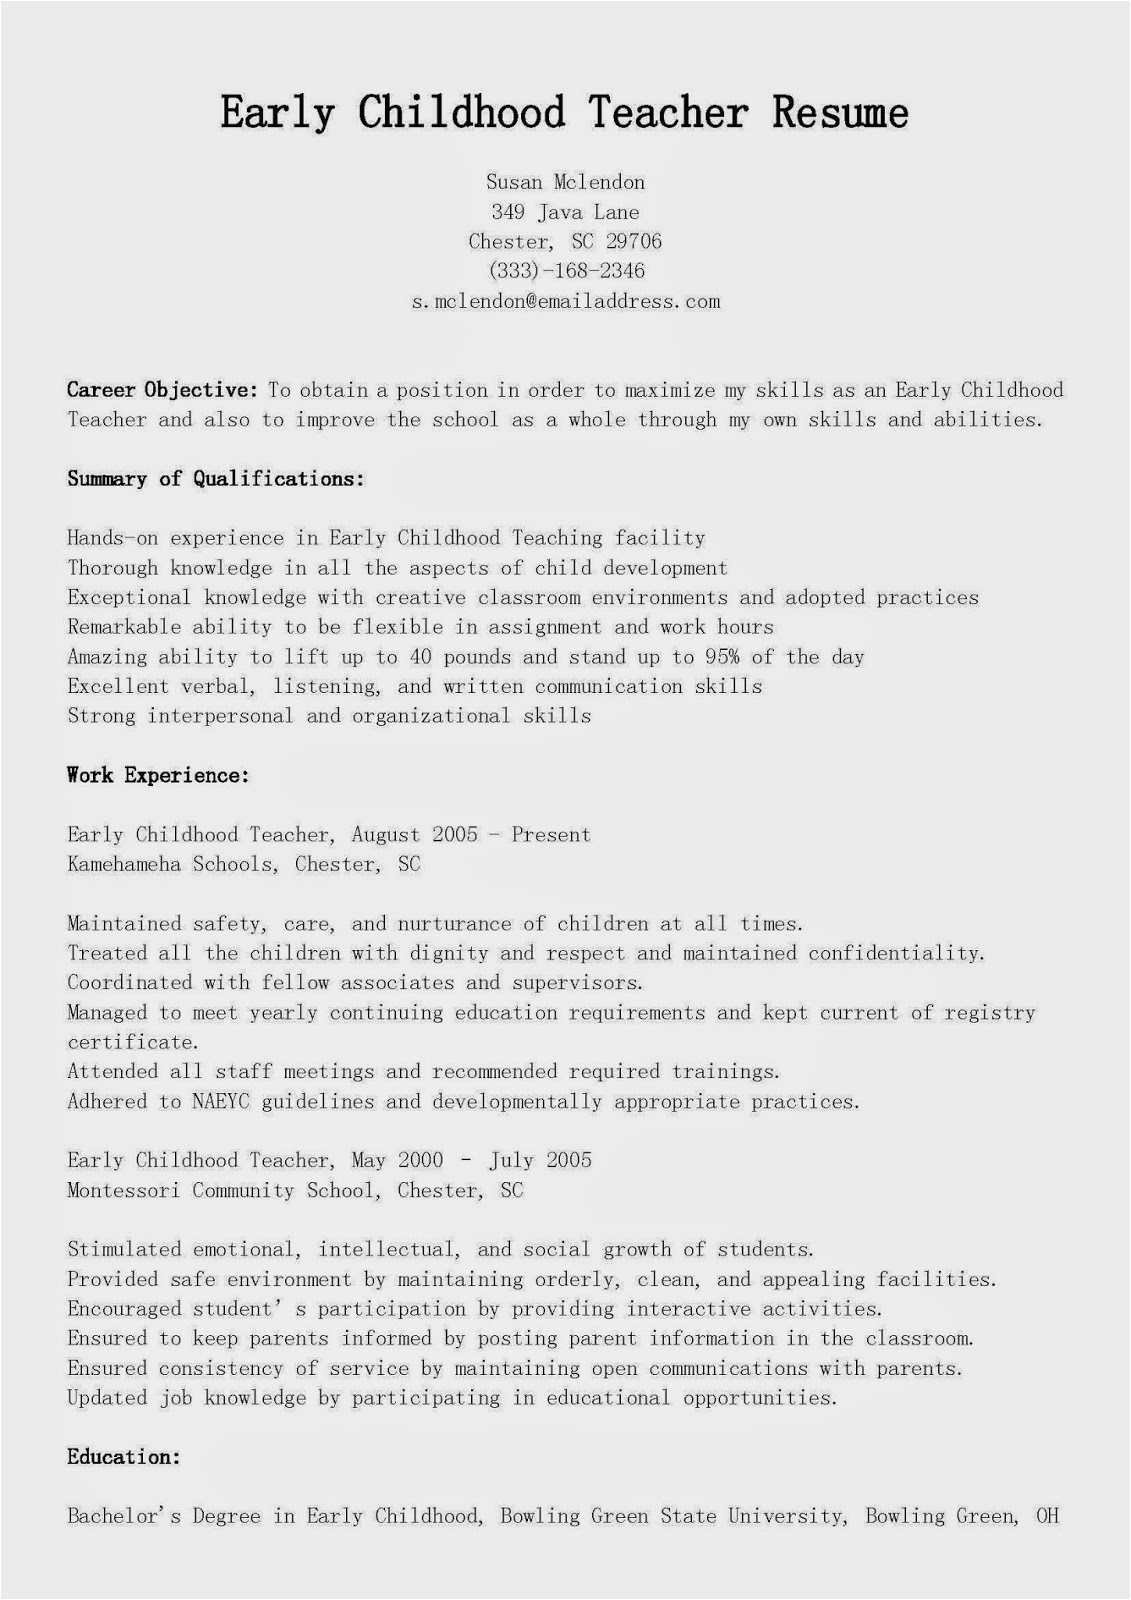 Early Childhood Education Resume Objective Samples Resume Samples Early Childhood Teacher Resume Sample